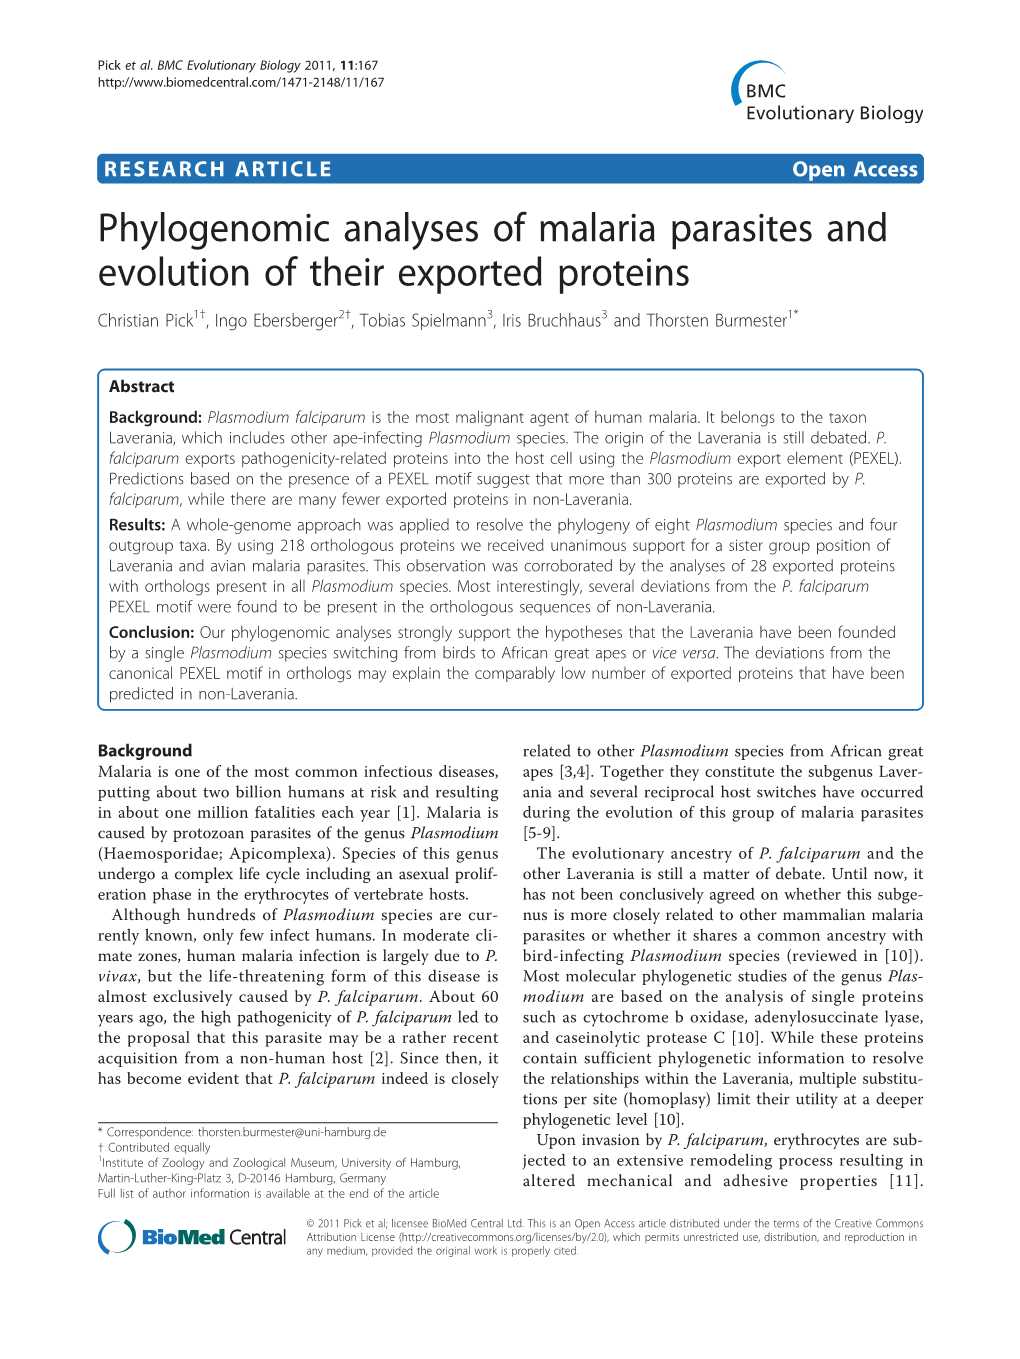 Phylogenomic Analyses of Malaria Parasites and Evolution of Their